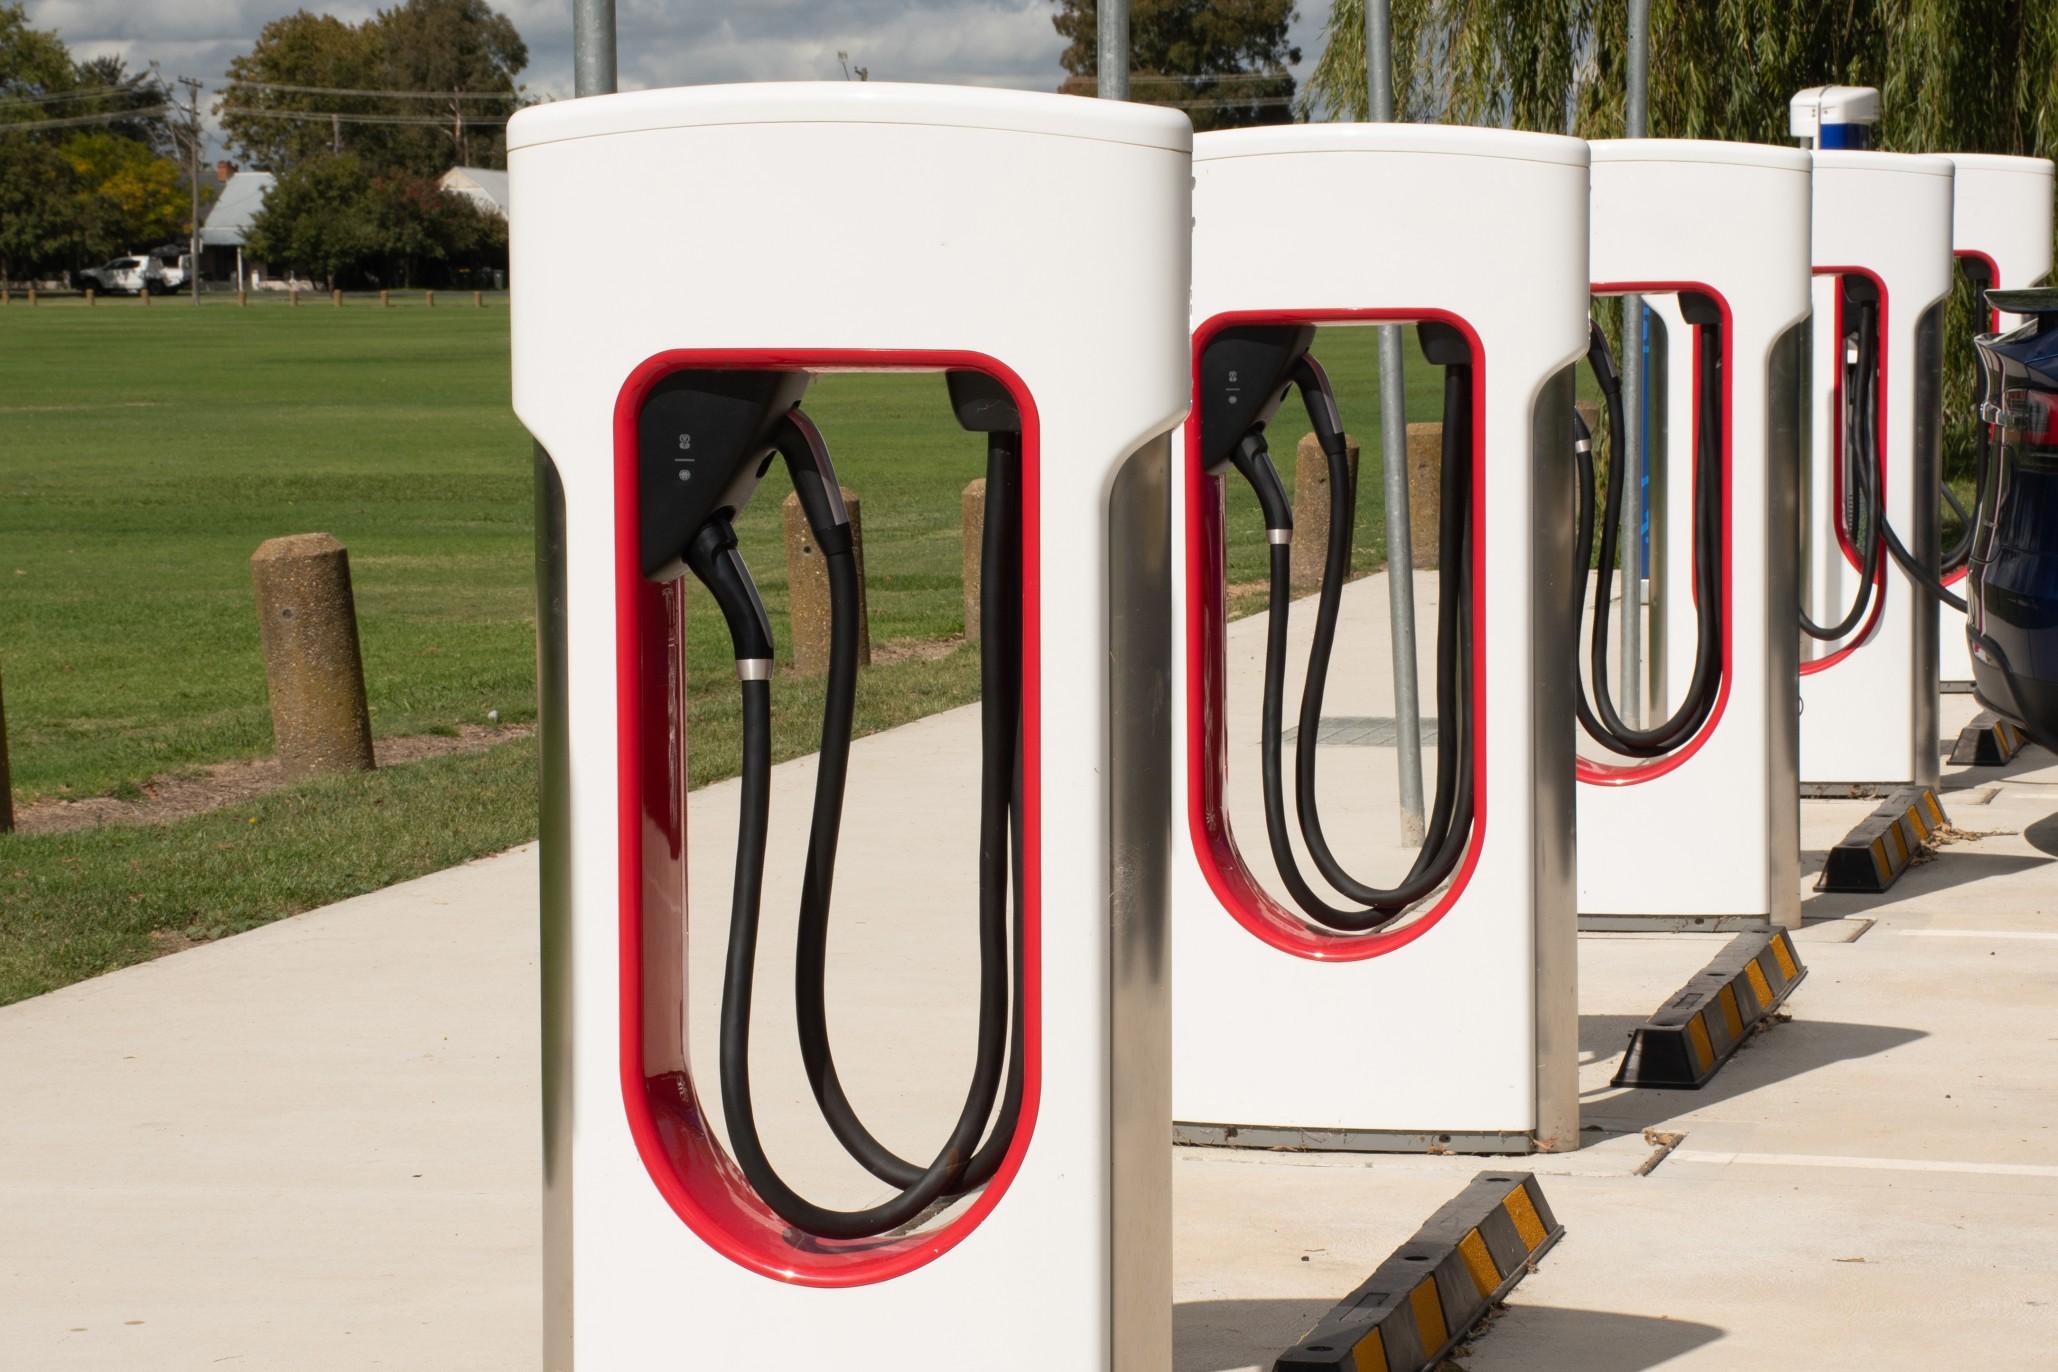 Tesla may be sharing its Supercharger stations soon